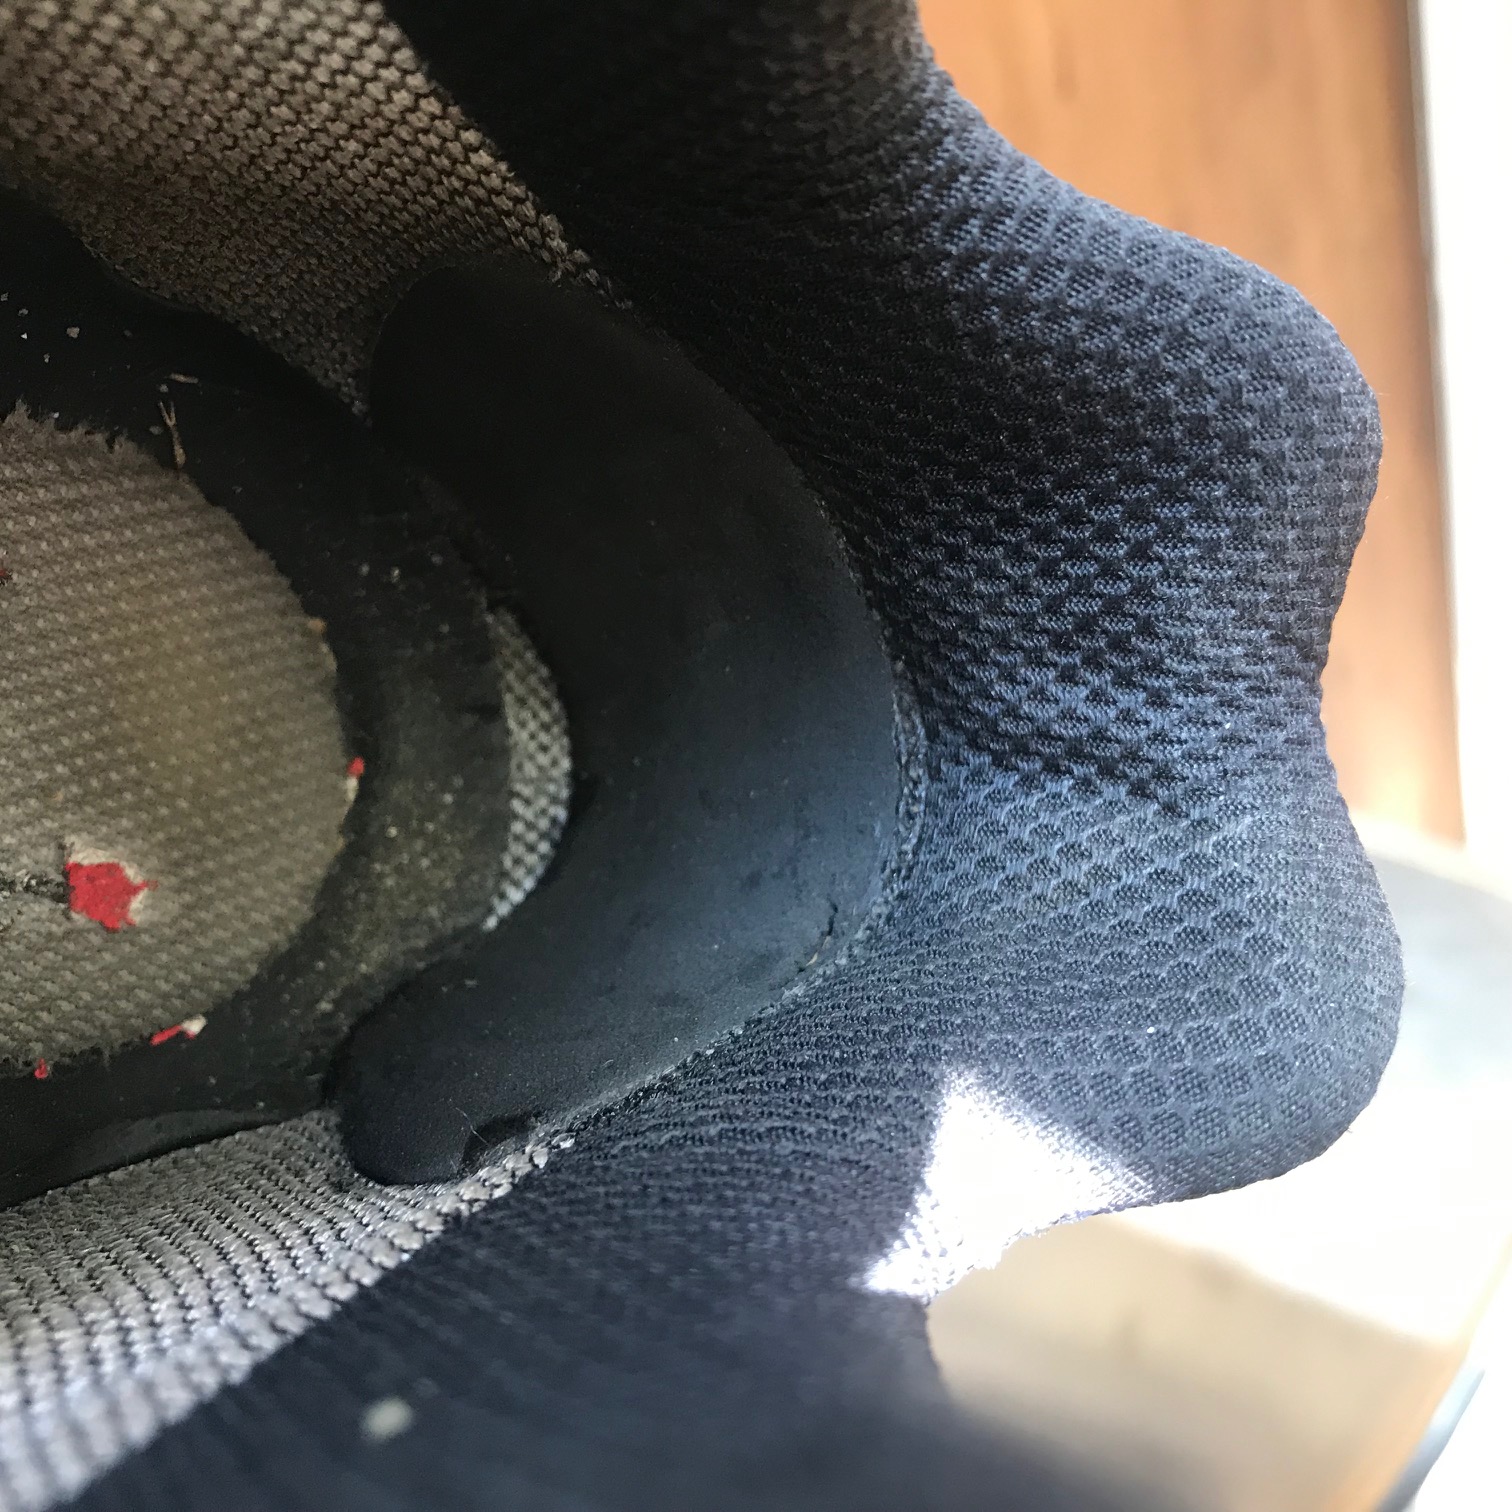 Gore-Tex Trail Shoes or Not? - Backpacking Light